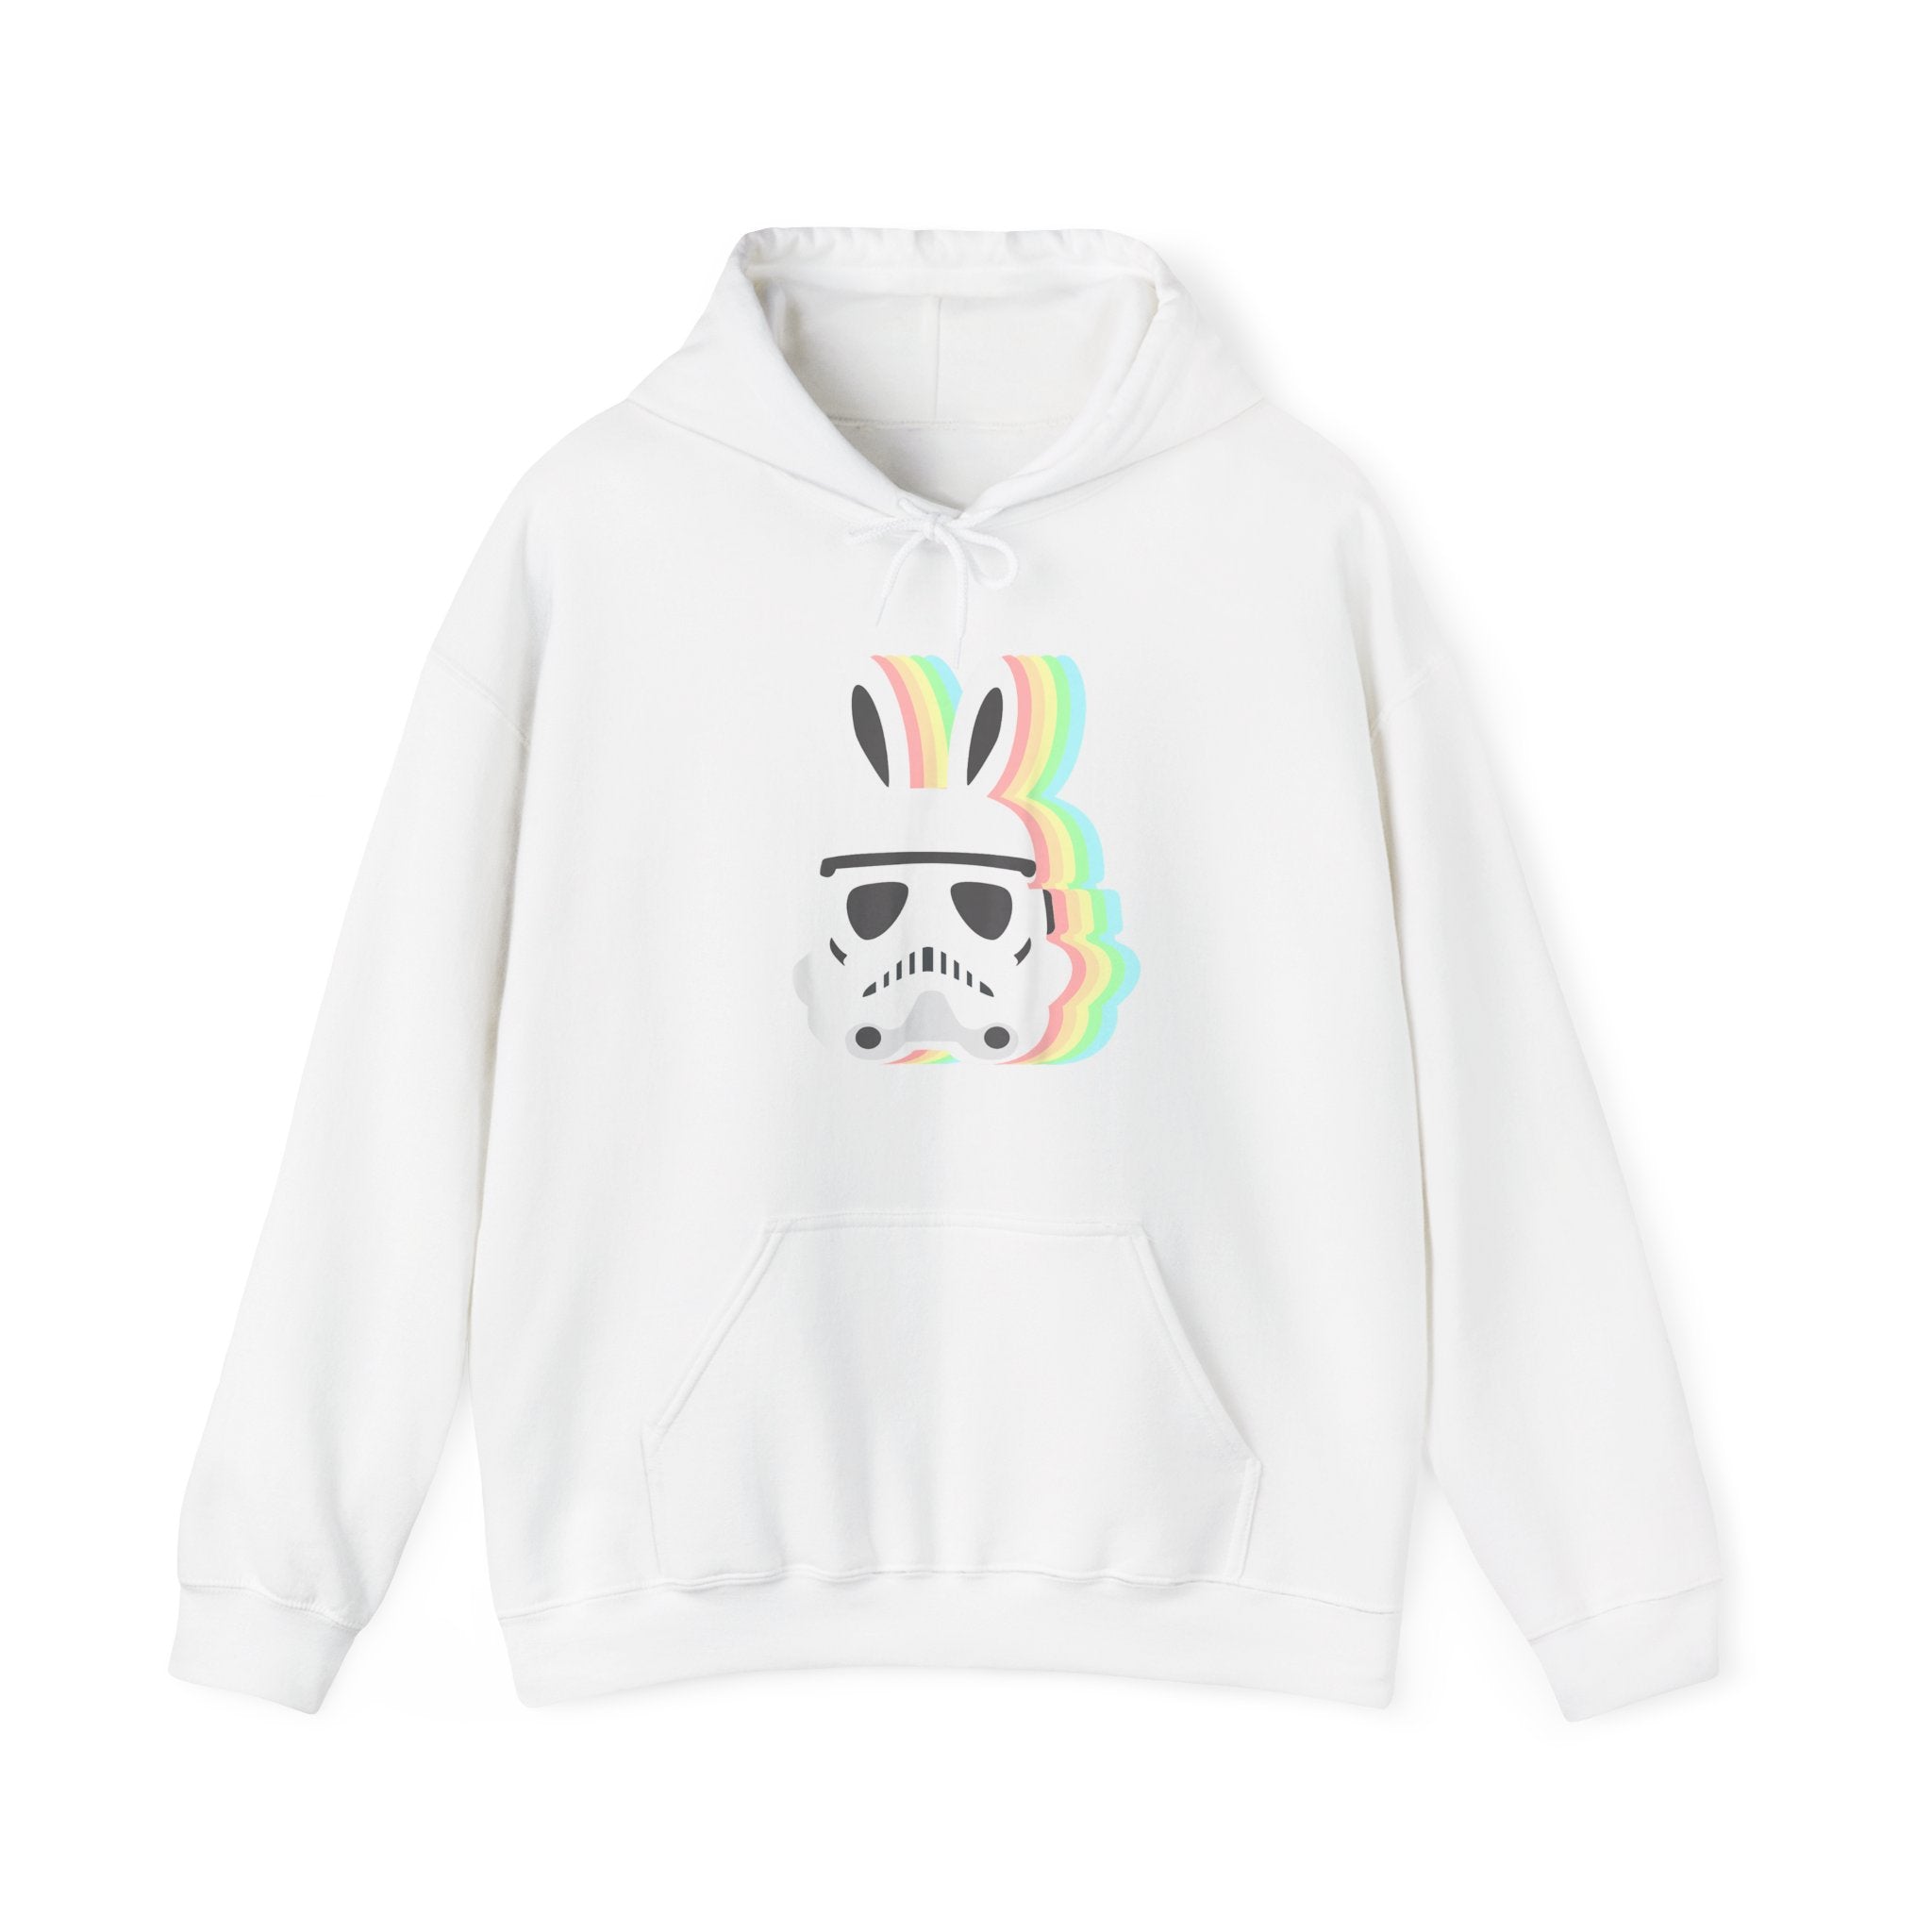 A Star Wars Easter Stormtrooper - Hooded Sweatshirt featuring a graphic of an Easter Stormtrooper helmet combined with multicolored bunny ears.